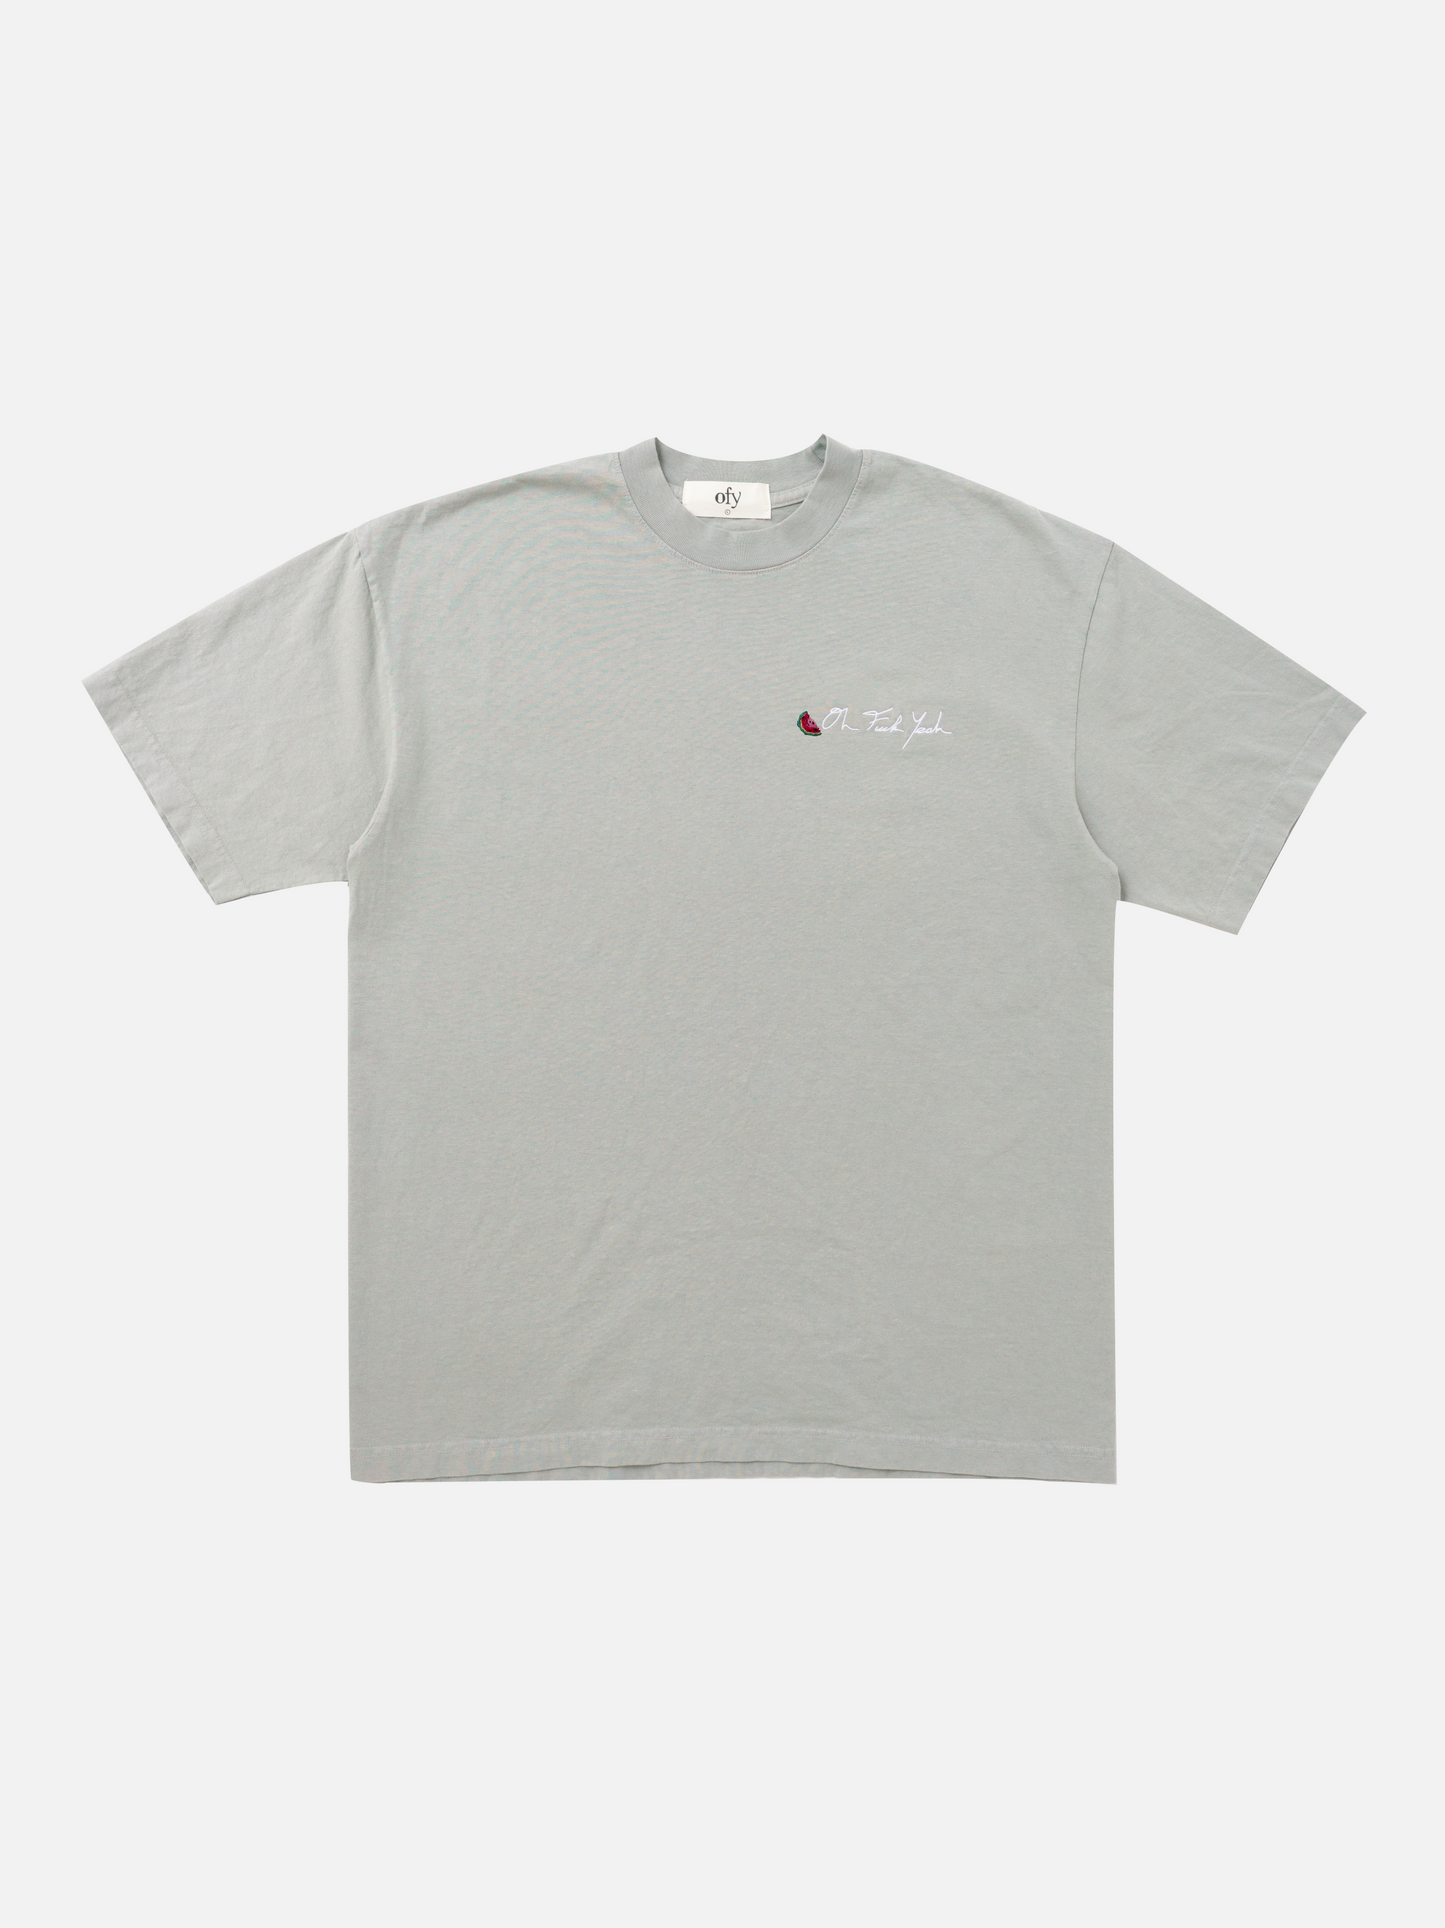 Classic Tee - Watermelon Embroidery